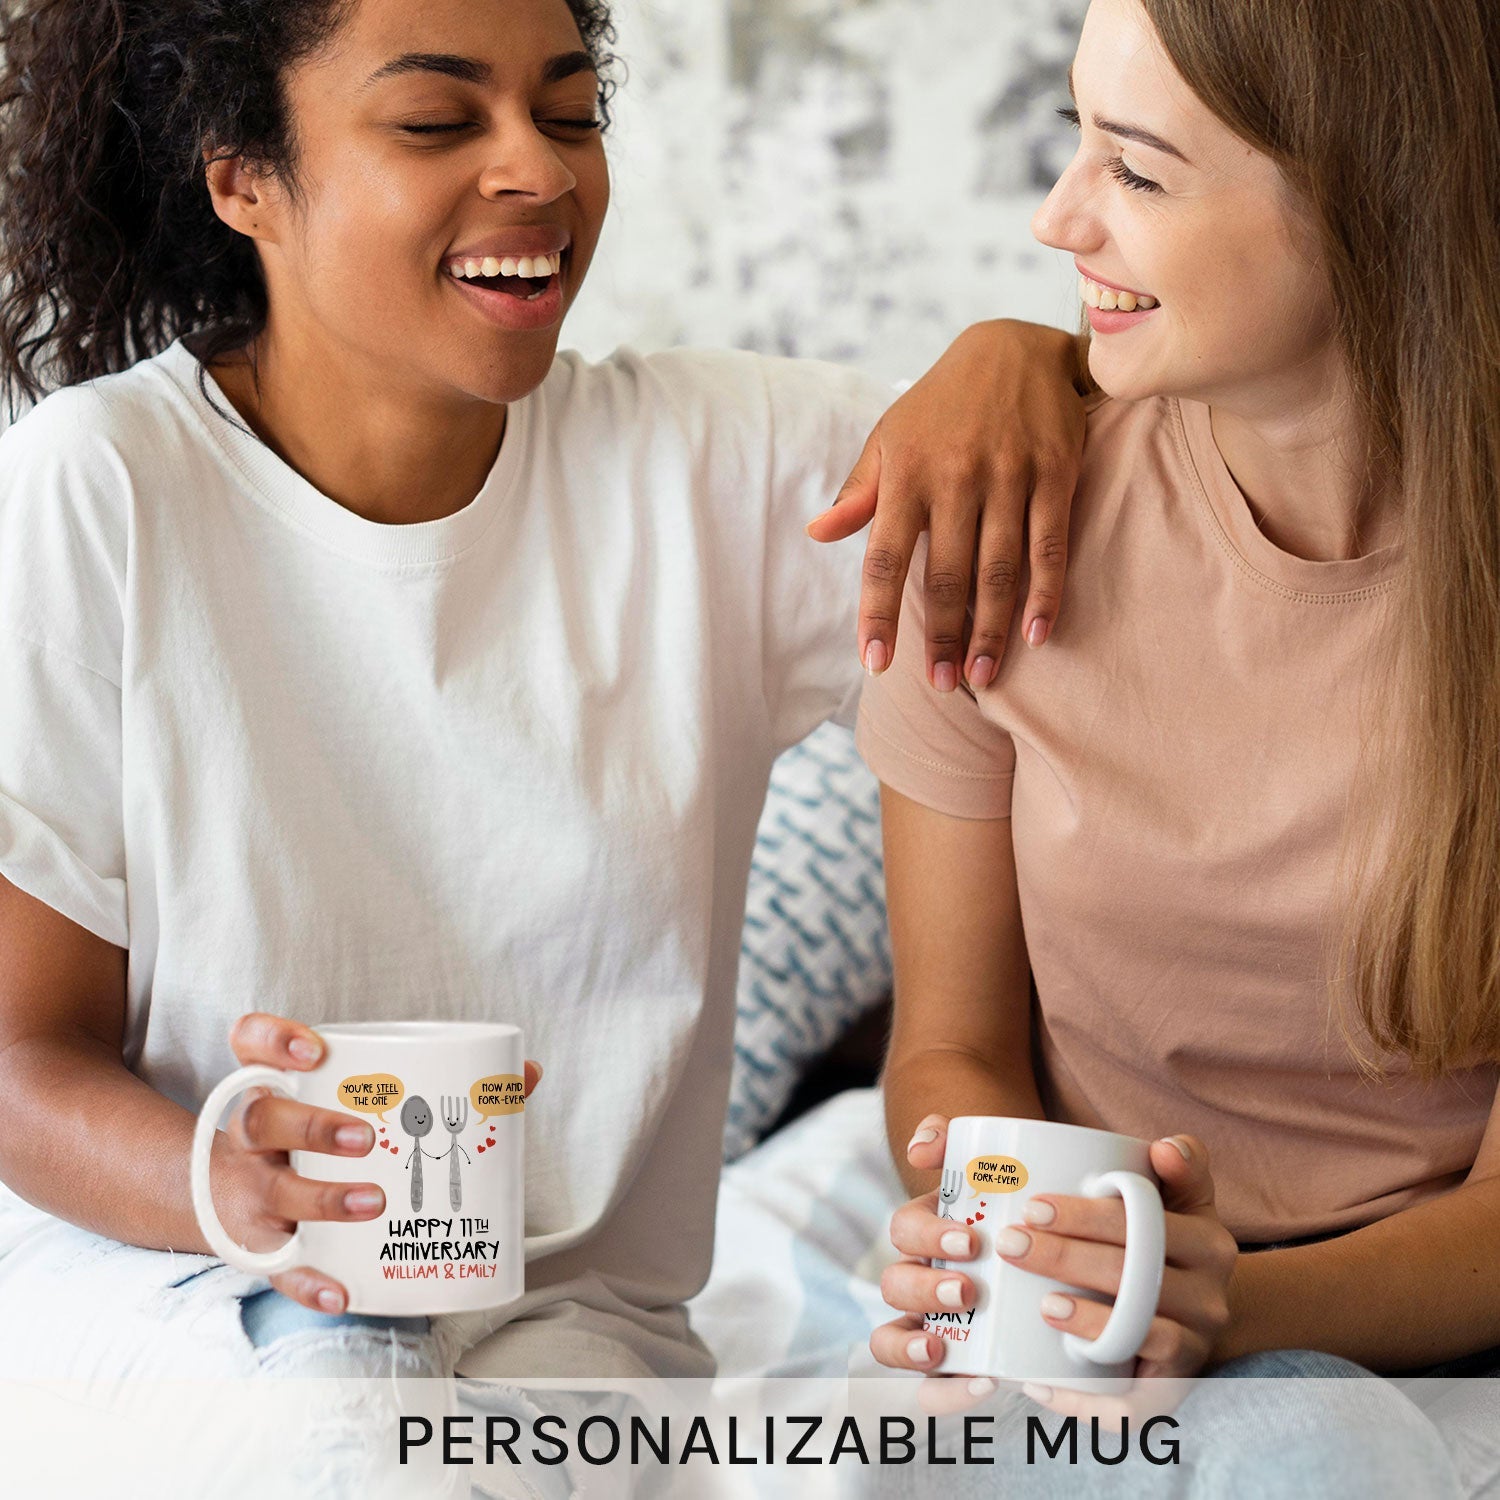 You're Steel The One - Personalized 11 Year Anniversary gift For Husband or Wife - Custom Mug - MyMindfulGifts